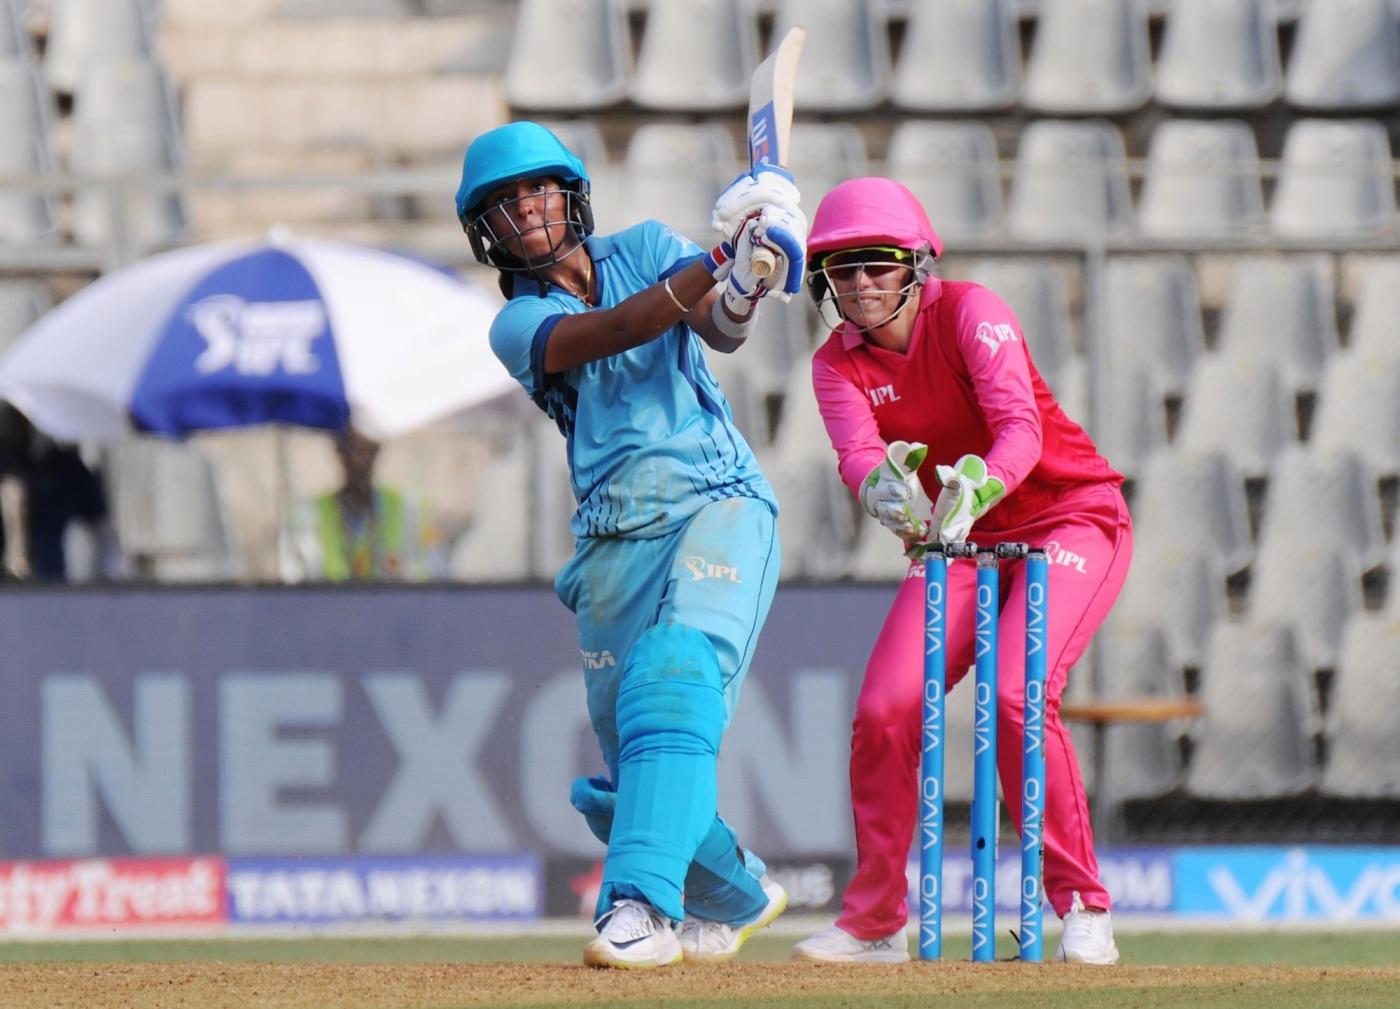 Mumbai: Supernovas' captain Harmanpreet Kaur in action during Women's T20 Challenge Match 2018 between Trailblazers and Supernovas at Wankhede Stadium in Mumbai on May 22, 2018. (Photo: IANS) by .